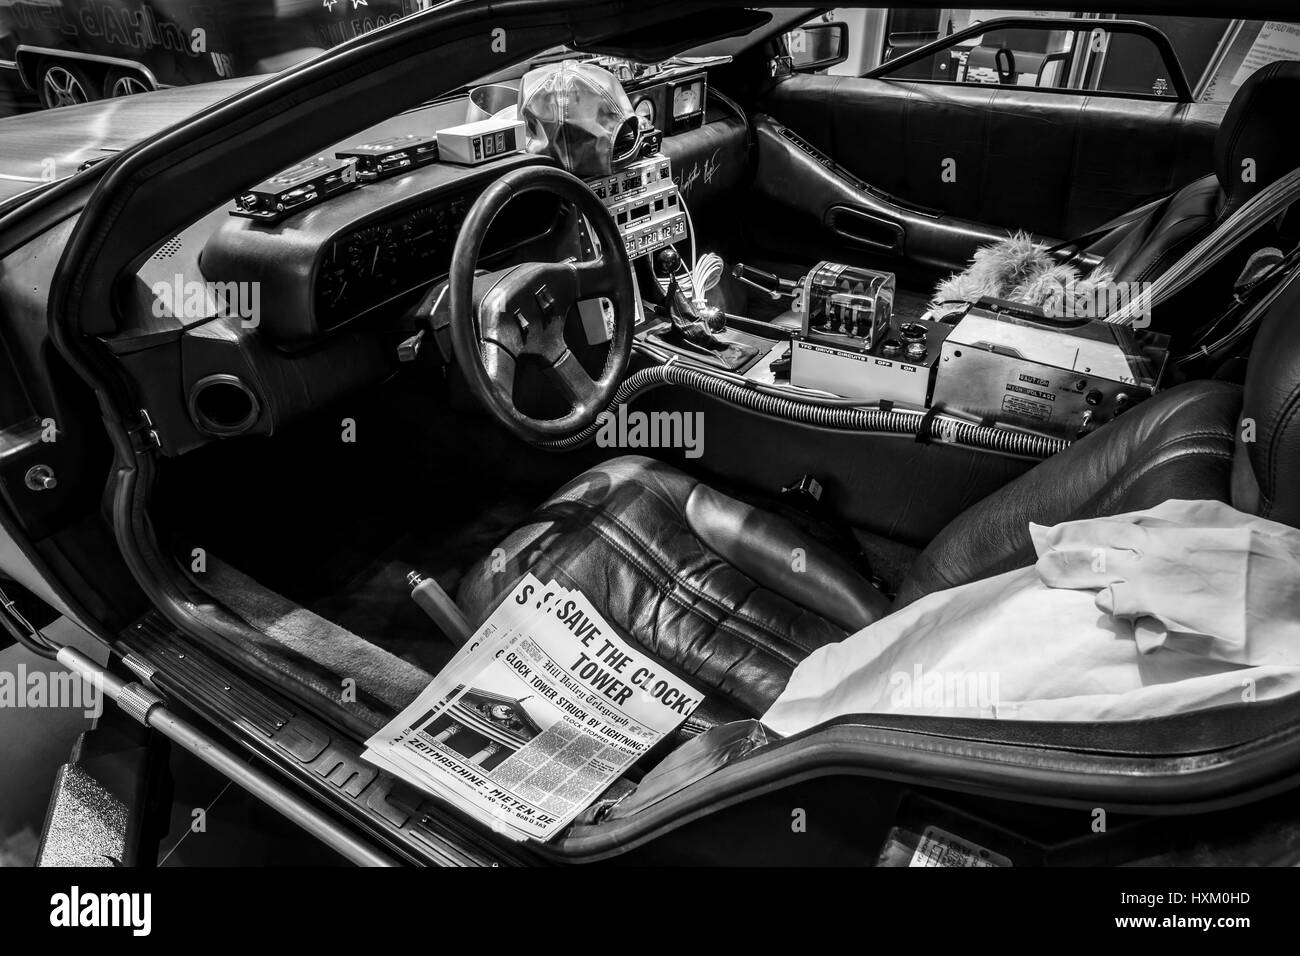 Car 12 Black And White Stock Photos Images Page 2 Alamy